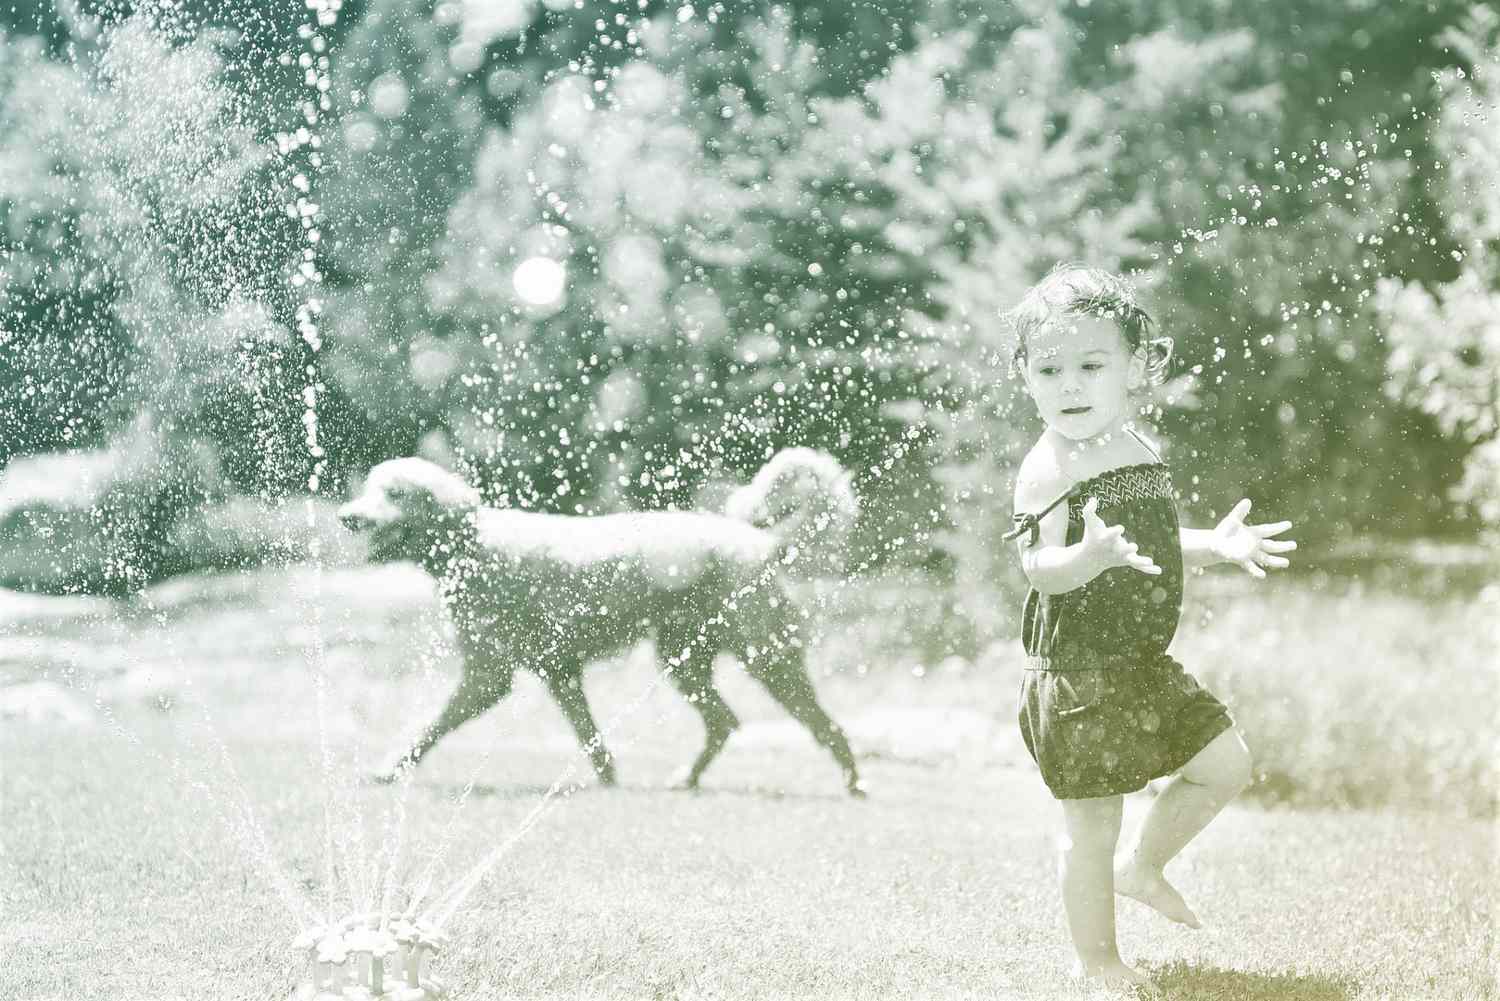 Cute little girl and her dog playing with sprinkling water